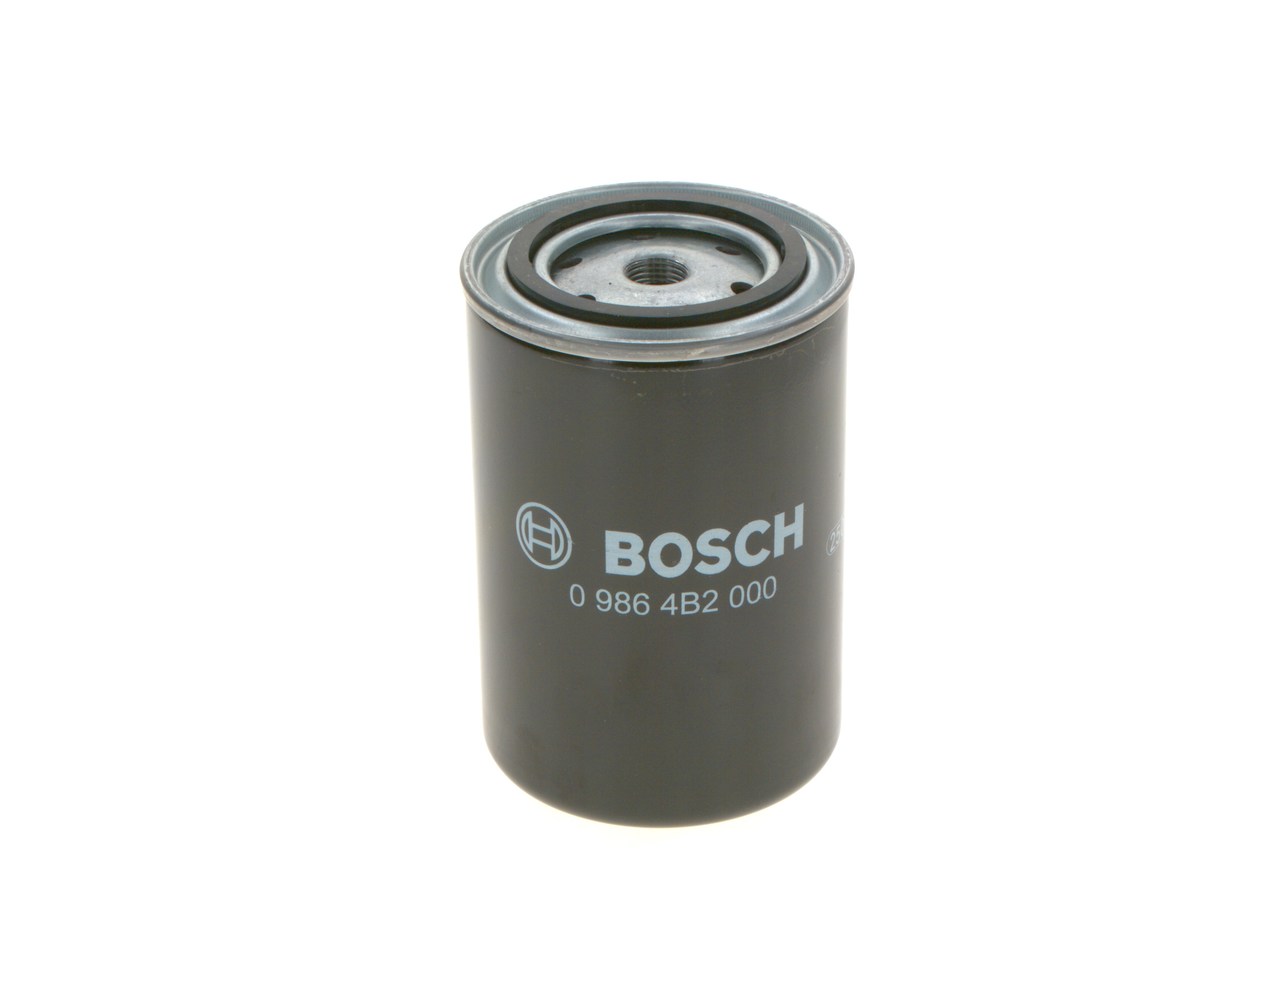 NM 000 BOSCH Spin-on Filter Height: 144mm Inline fuel filter 0 986 4B2 000 buy